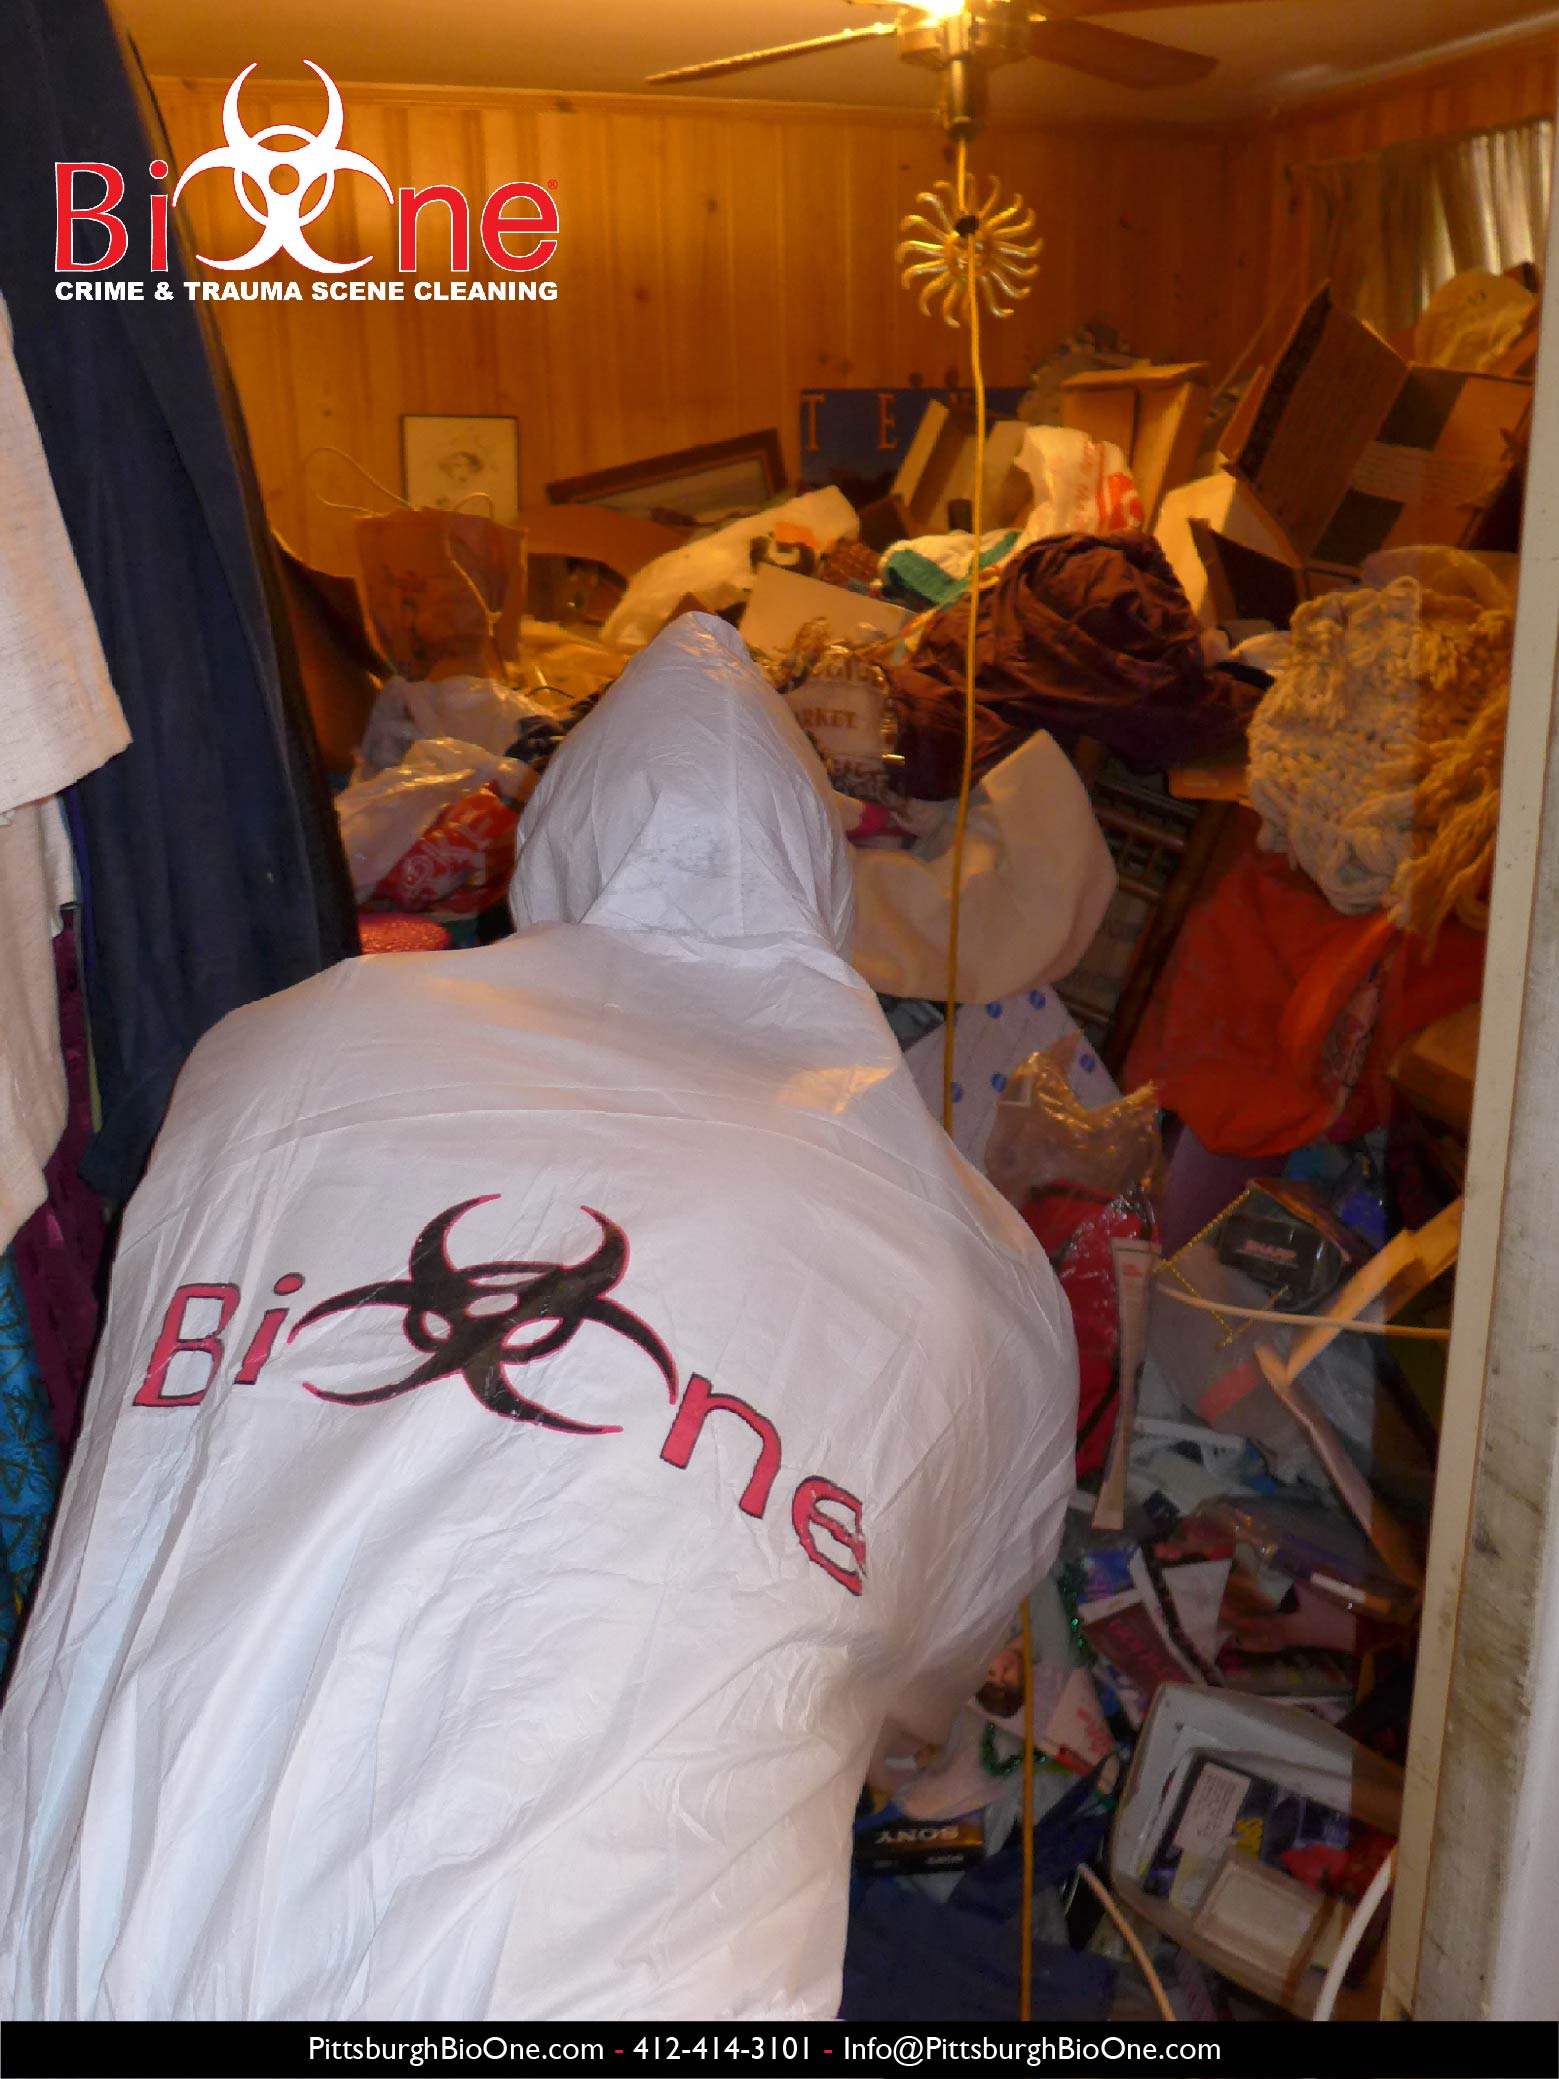 Technician entering a hoarded property. Photo credit: Bio-One of Pittsburgh.